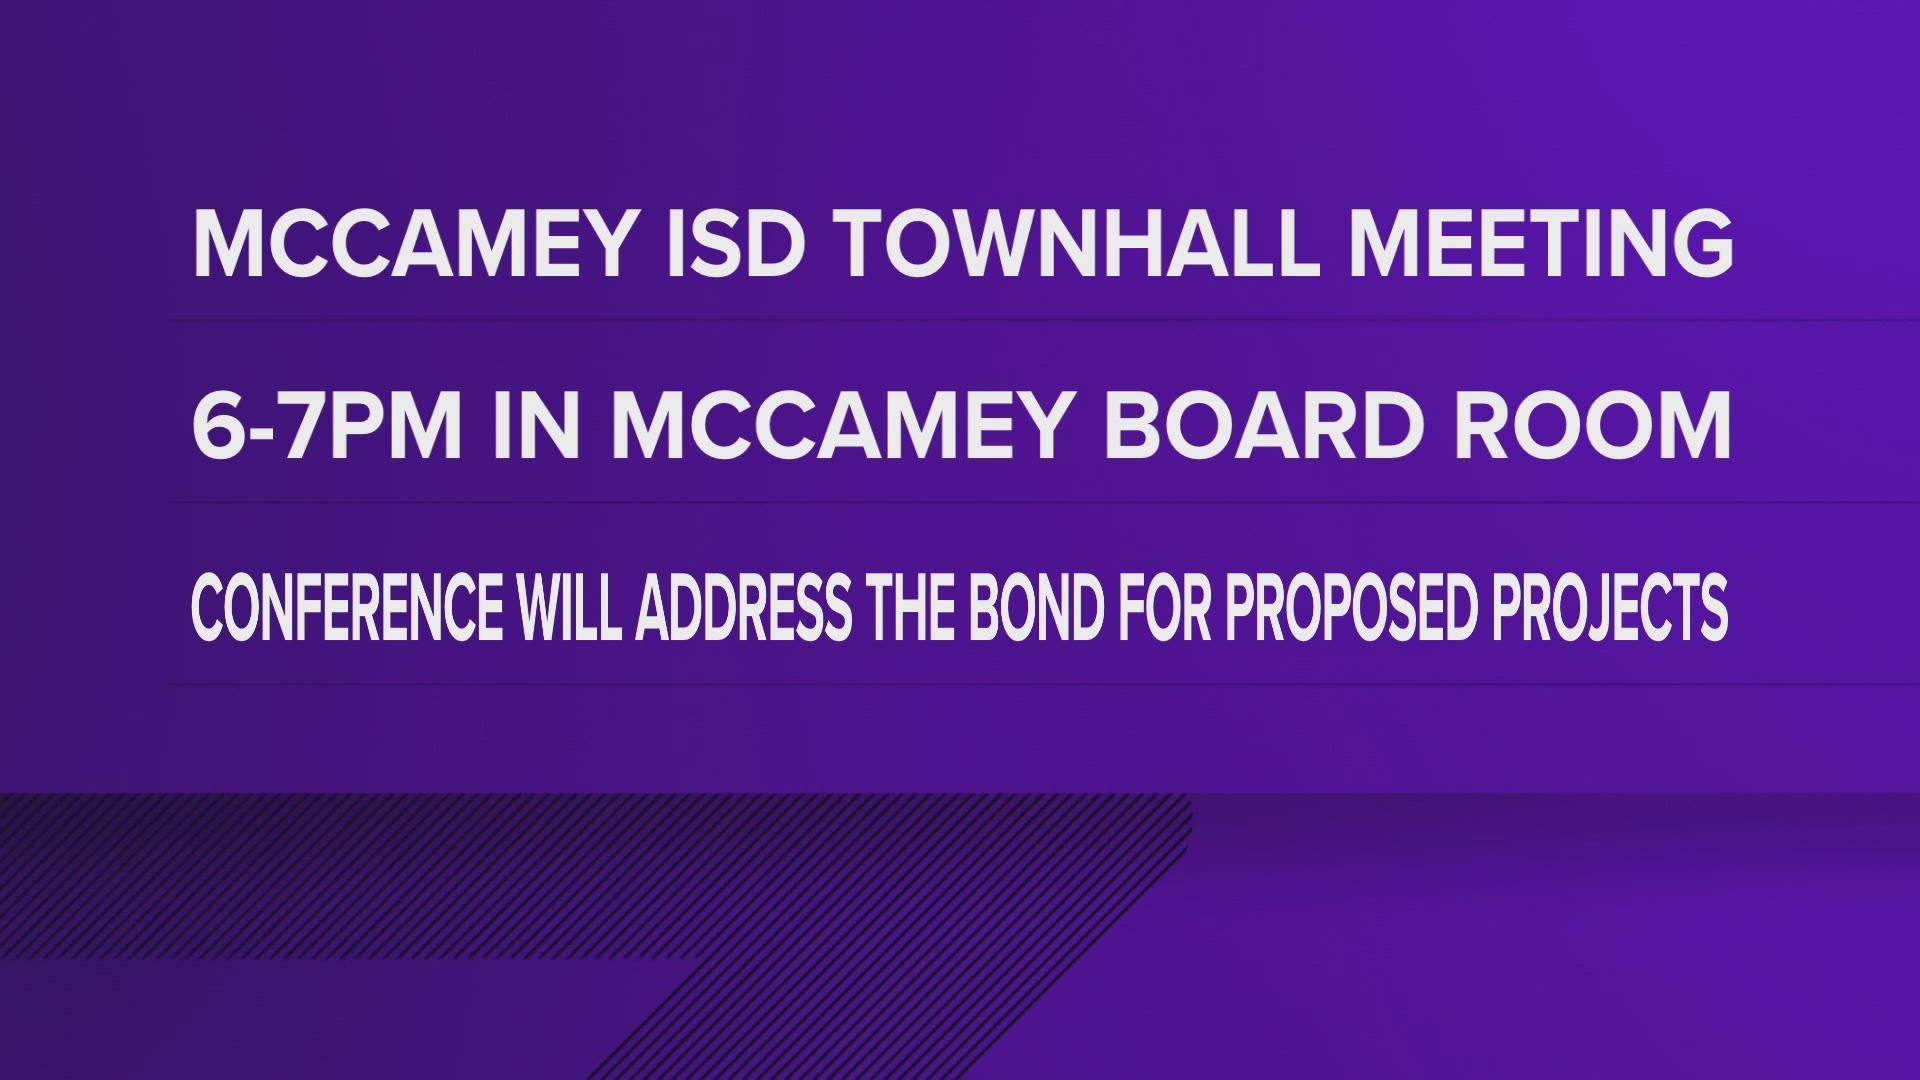 The proposed bond would total around $71.8 million.